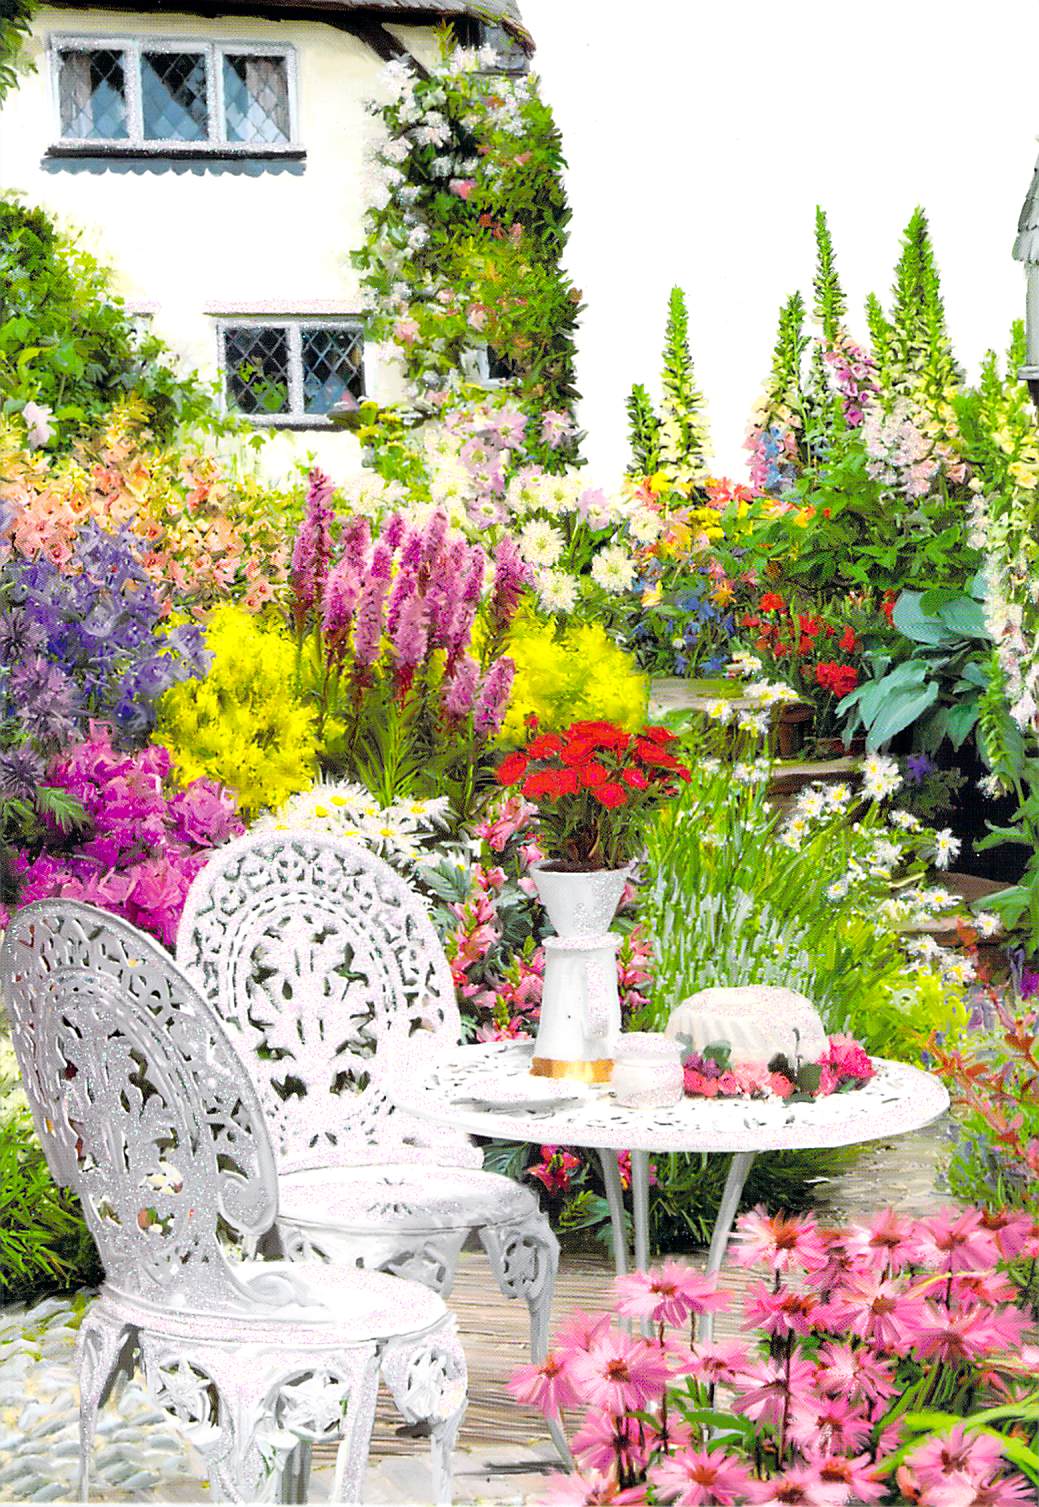 Outdoor scene with patio table & chairs. Lots of flowers and glitter